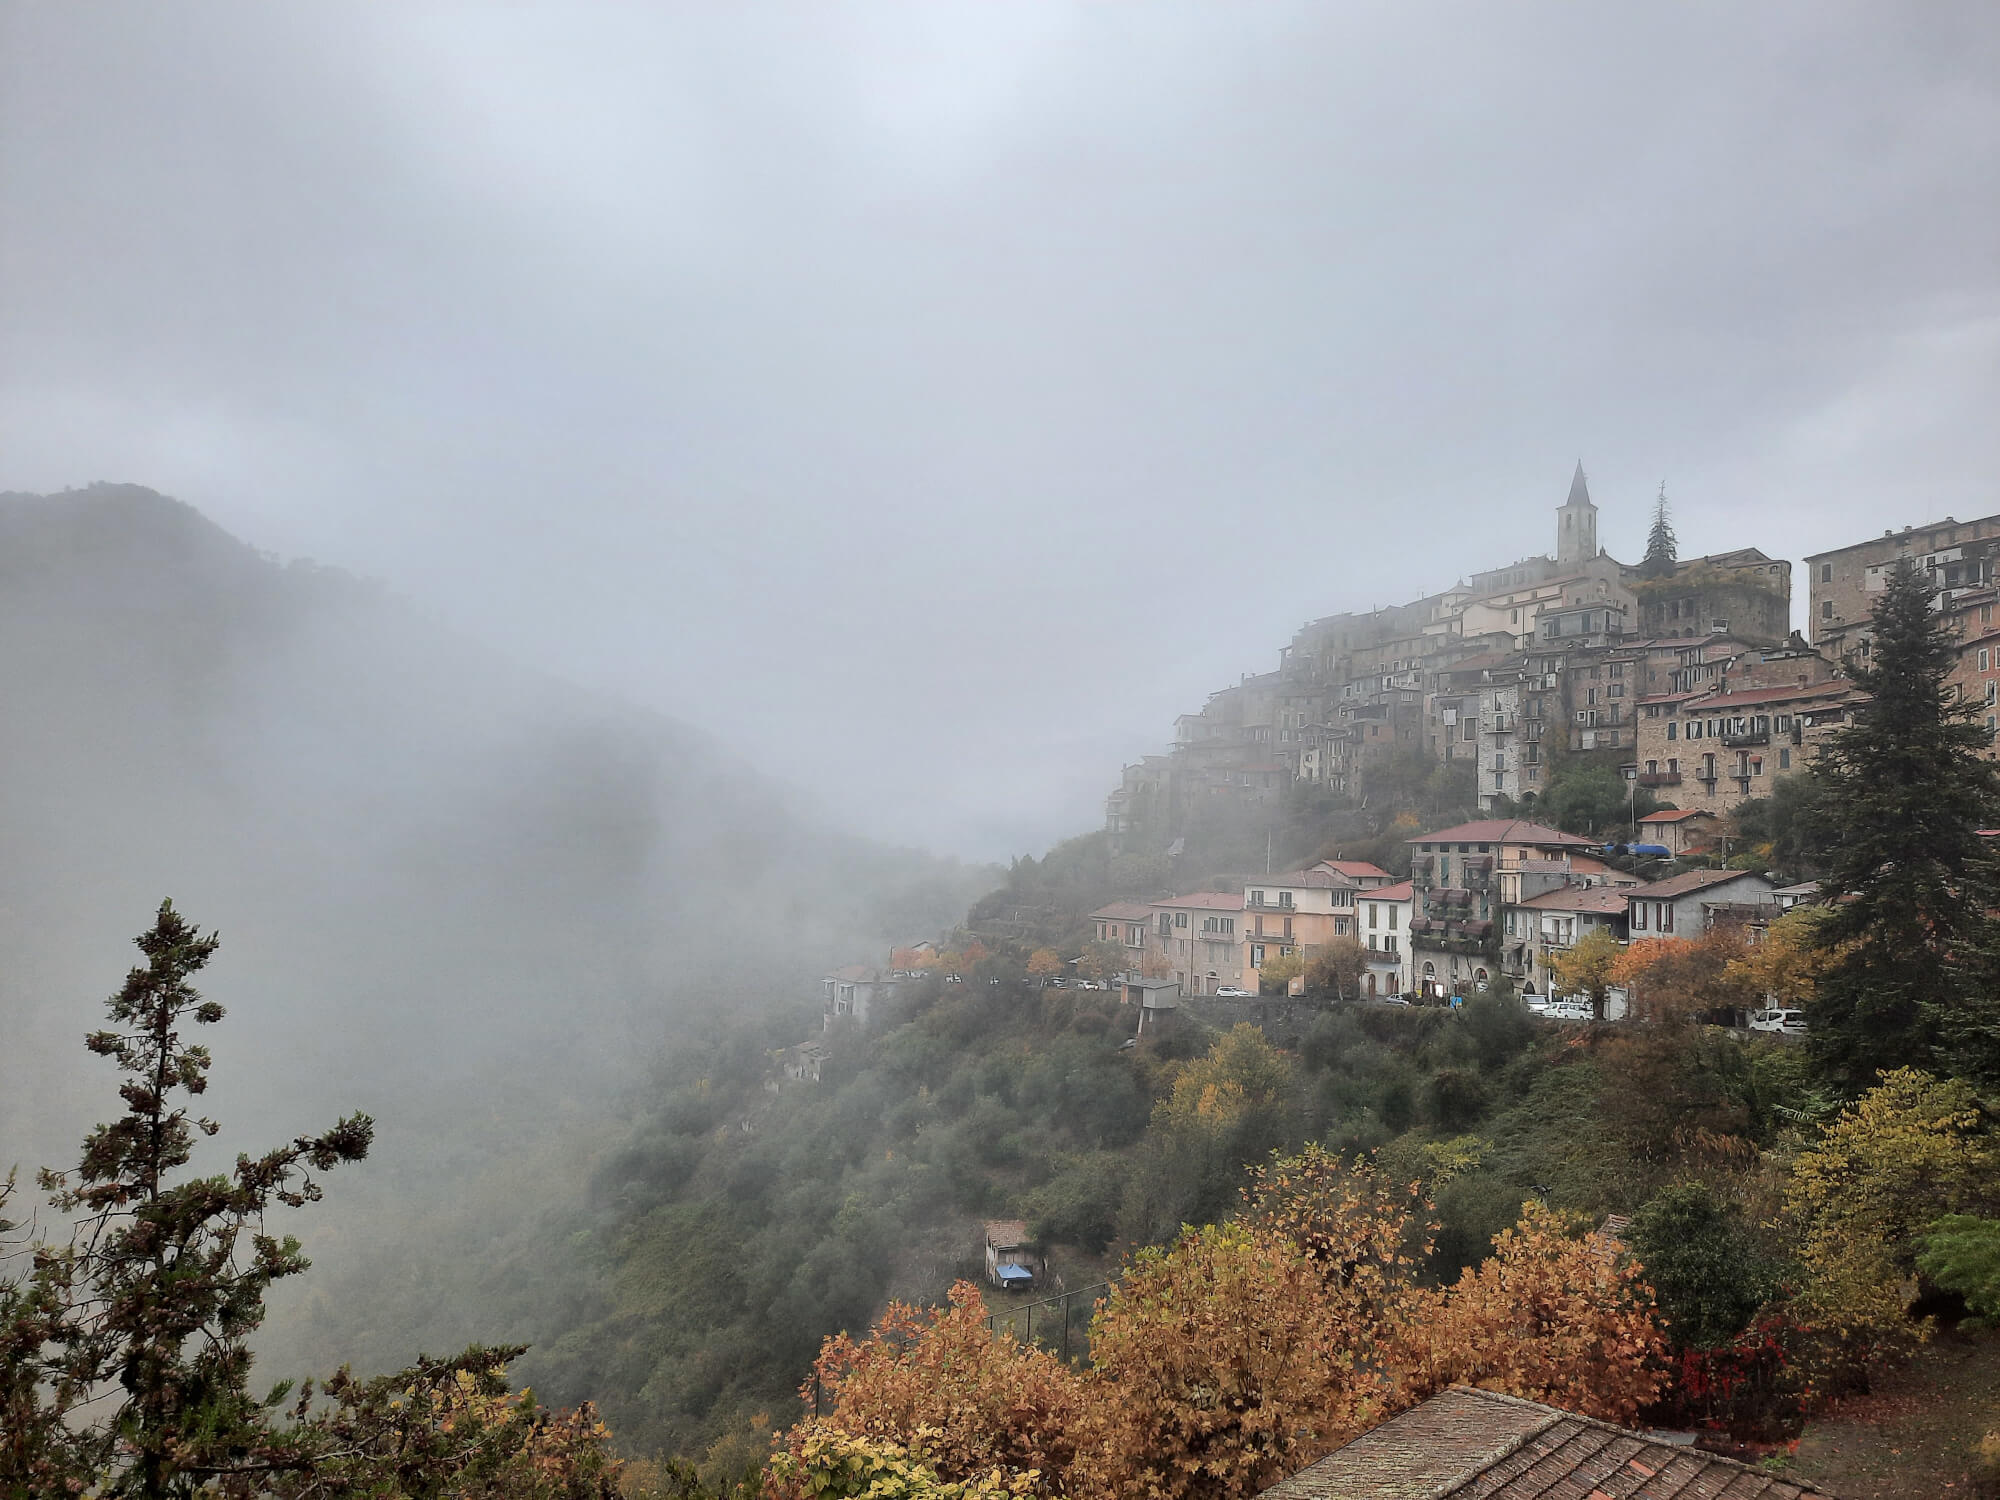 We visit Apricale, the village perched on the hillside